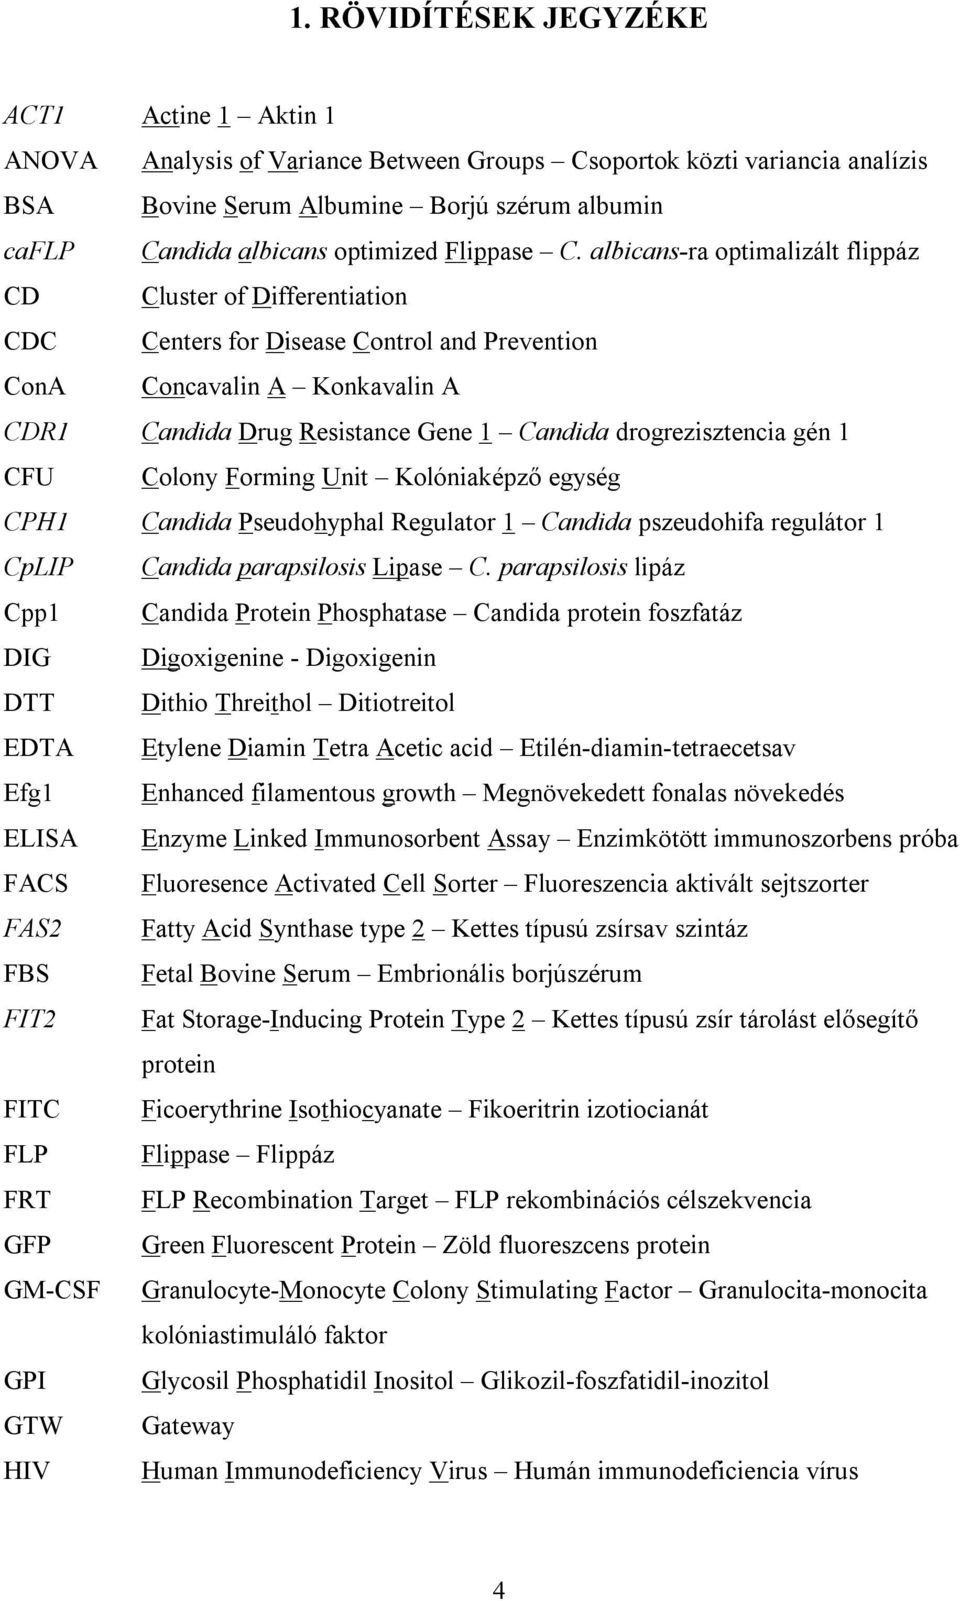 albicans-ra optimalizált flippáz CD Cluster of Differentiation CDC Centers for Disease Control and Prevention ConA Concavalin A Konkavalin A CDR1 Candida Drug Resistance Gene 1 Candida